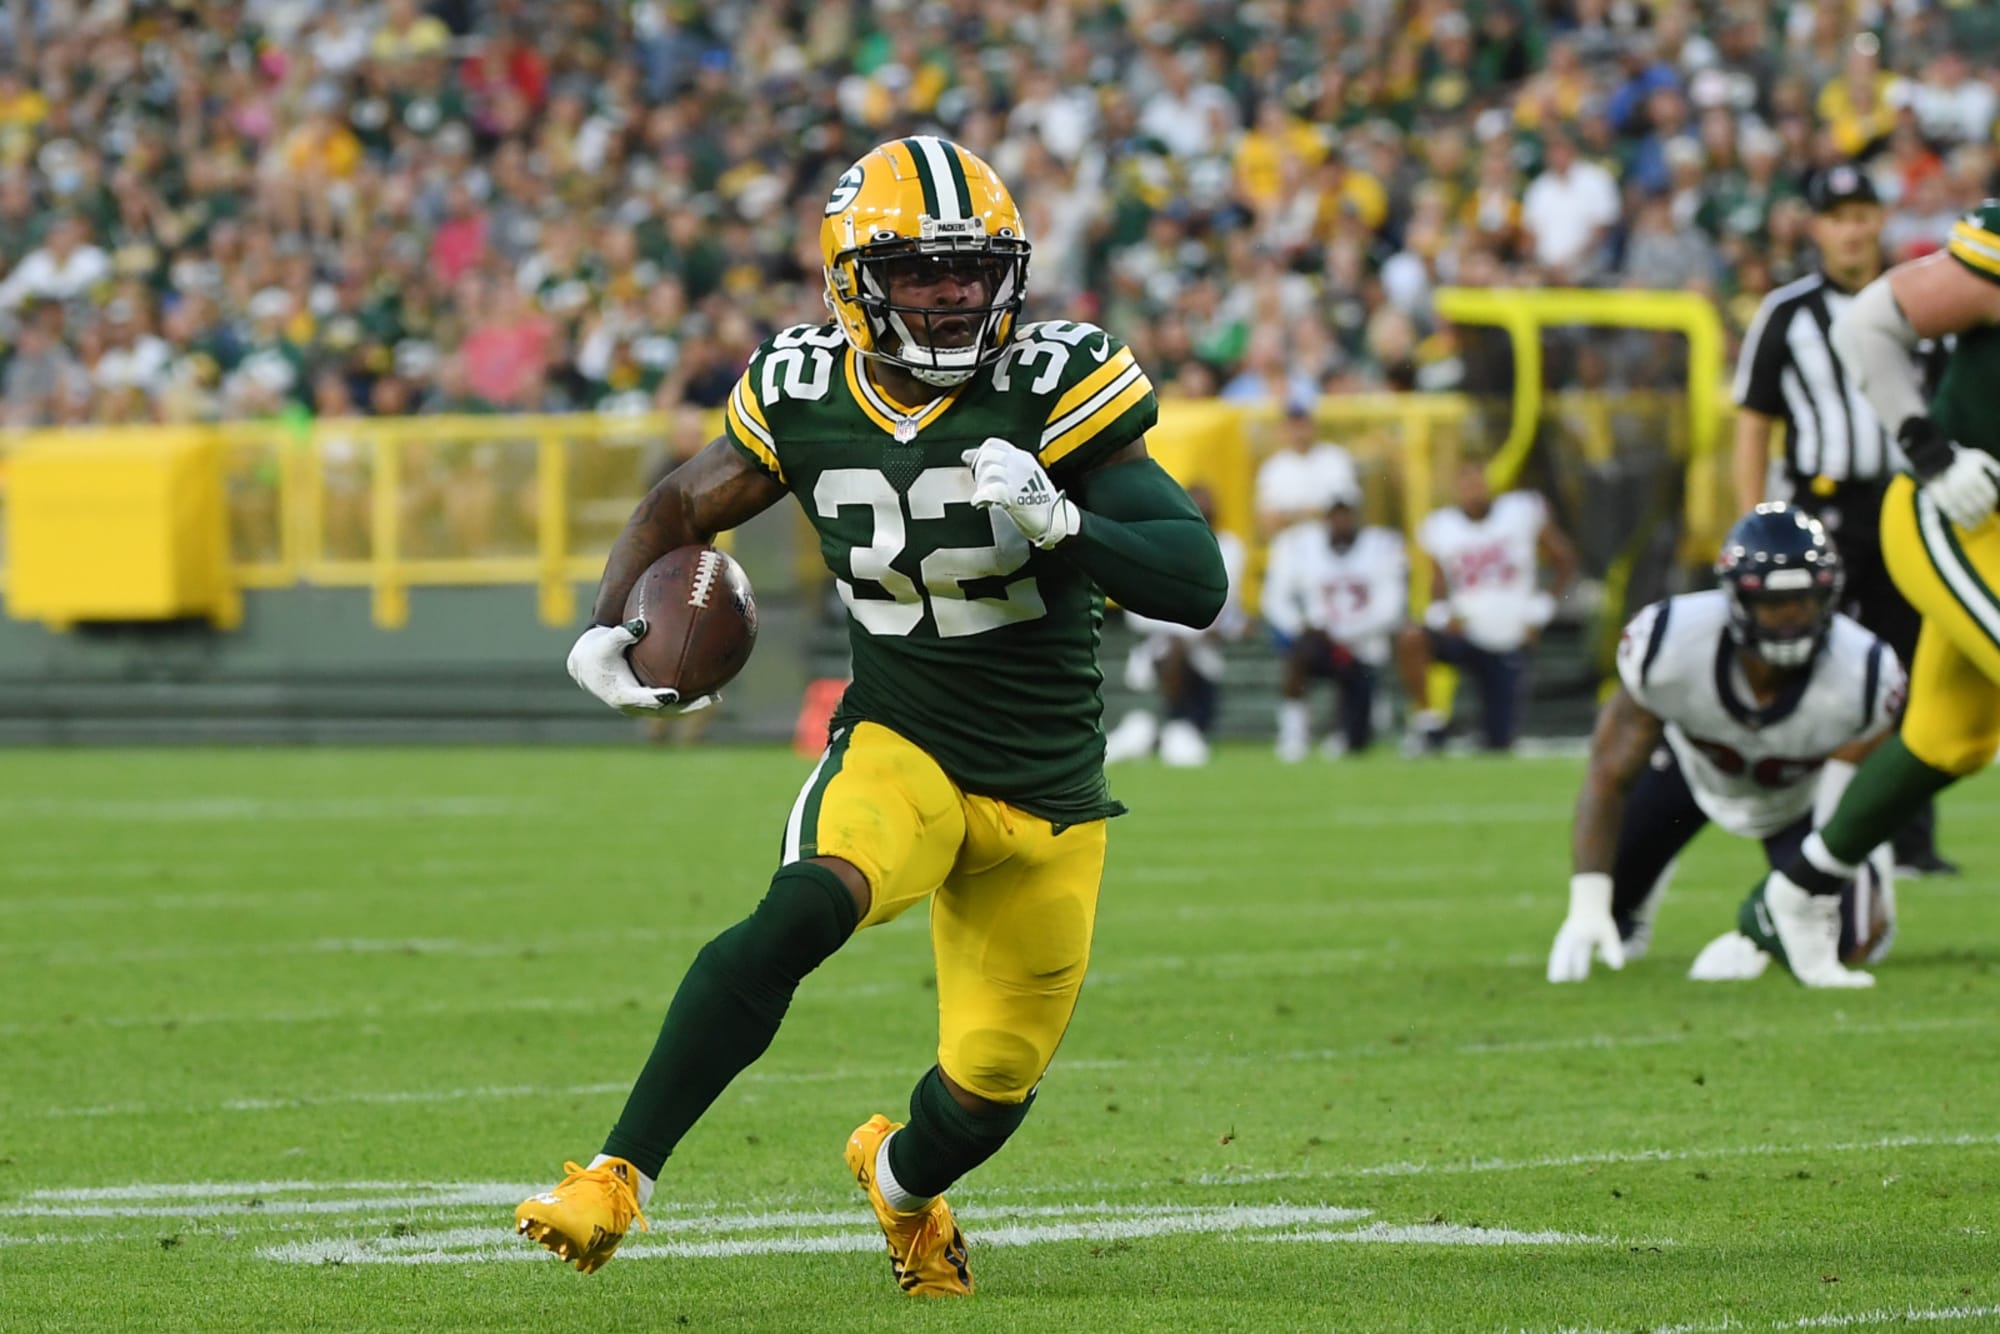 Packers Kylin Hill jumps over kicker on incredible 41yard return (video)